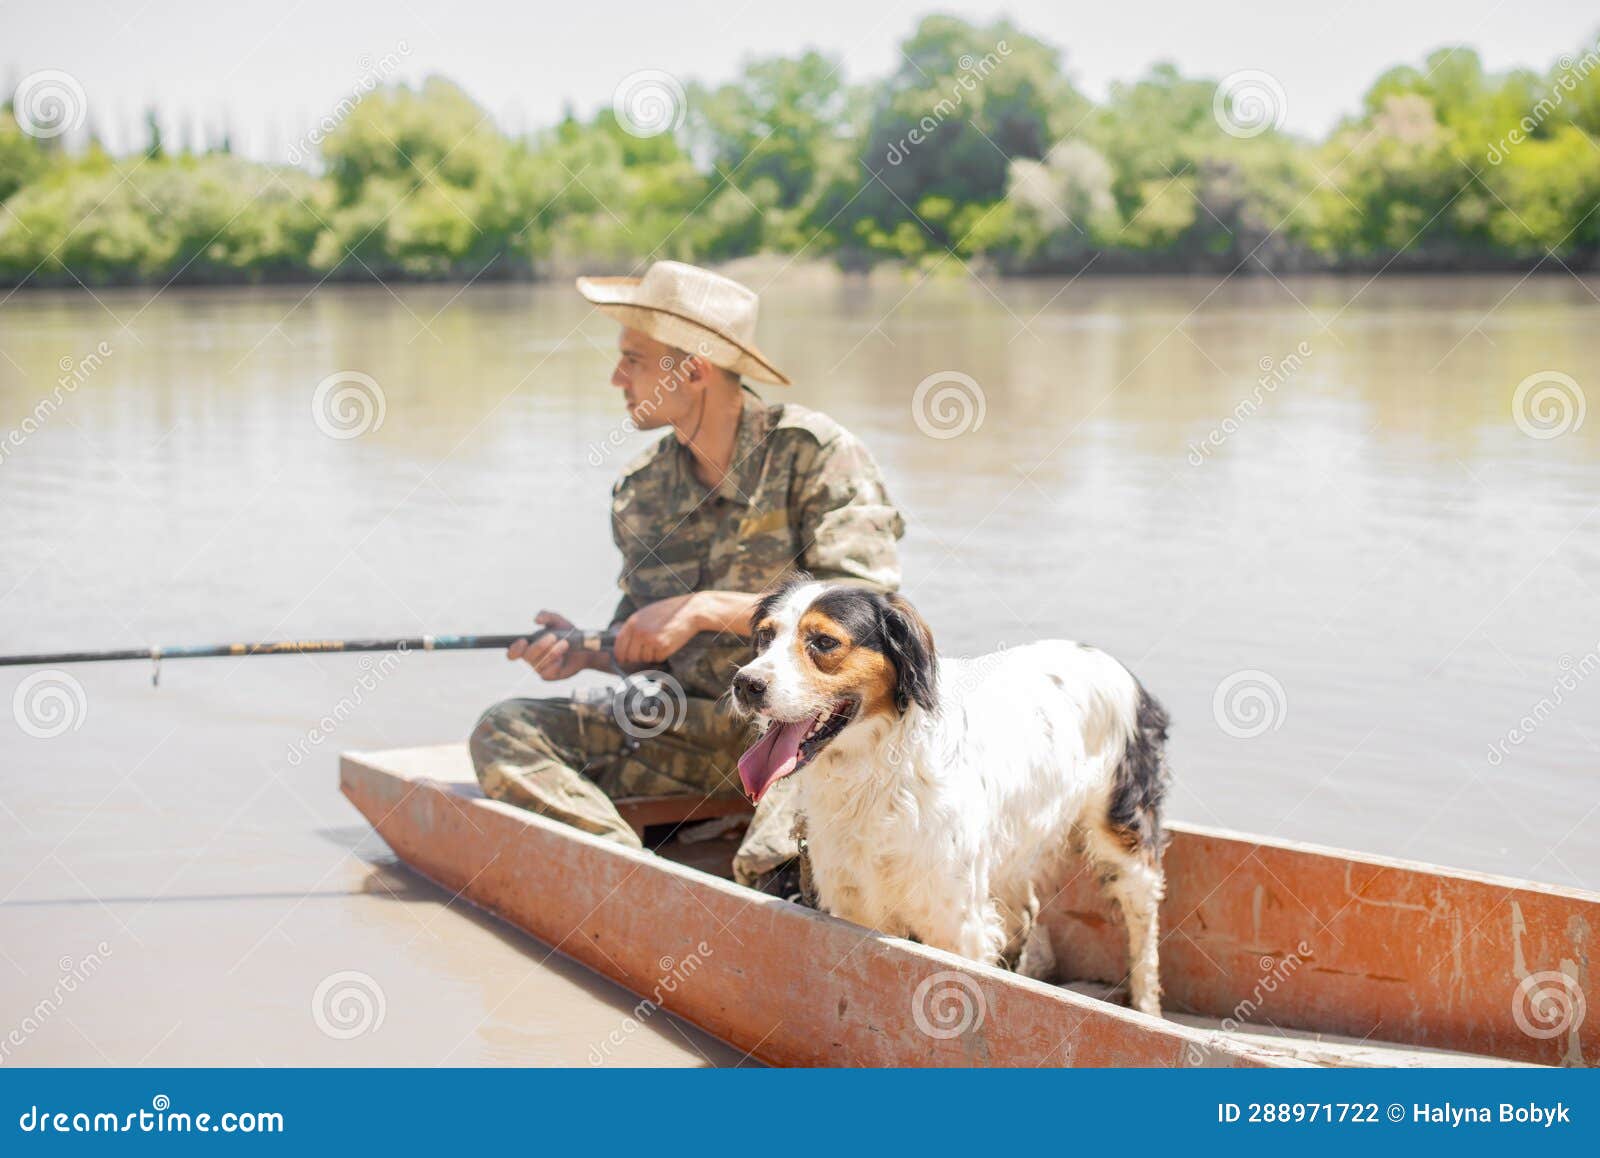 Focused Fisherman with Dog, Looking at Float, while Holding Fishing Rod and  Floating. Stock Photo - Image of fishing, space: 288971722